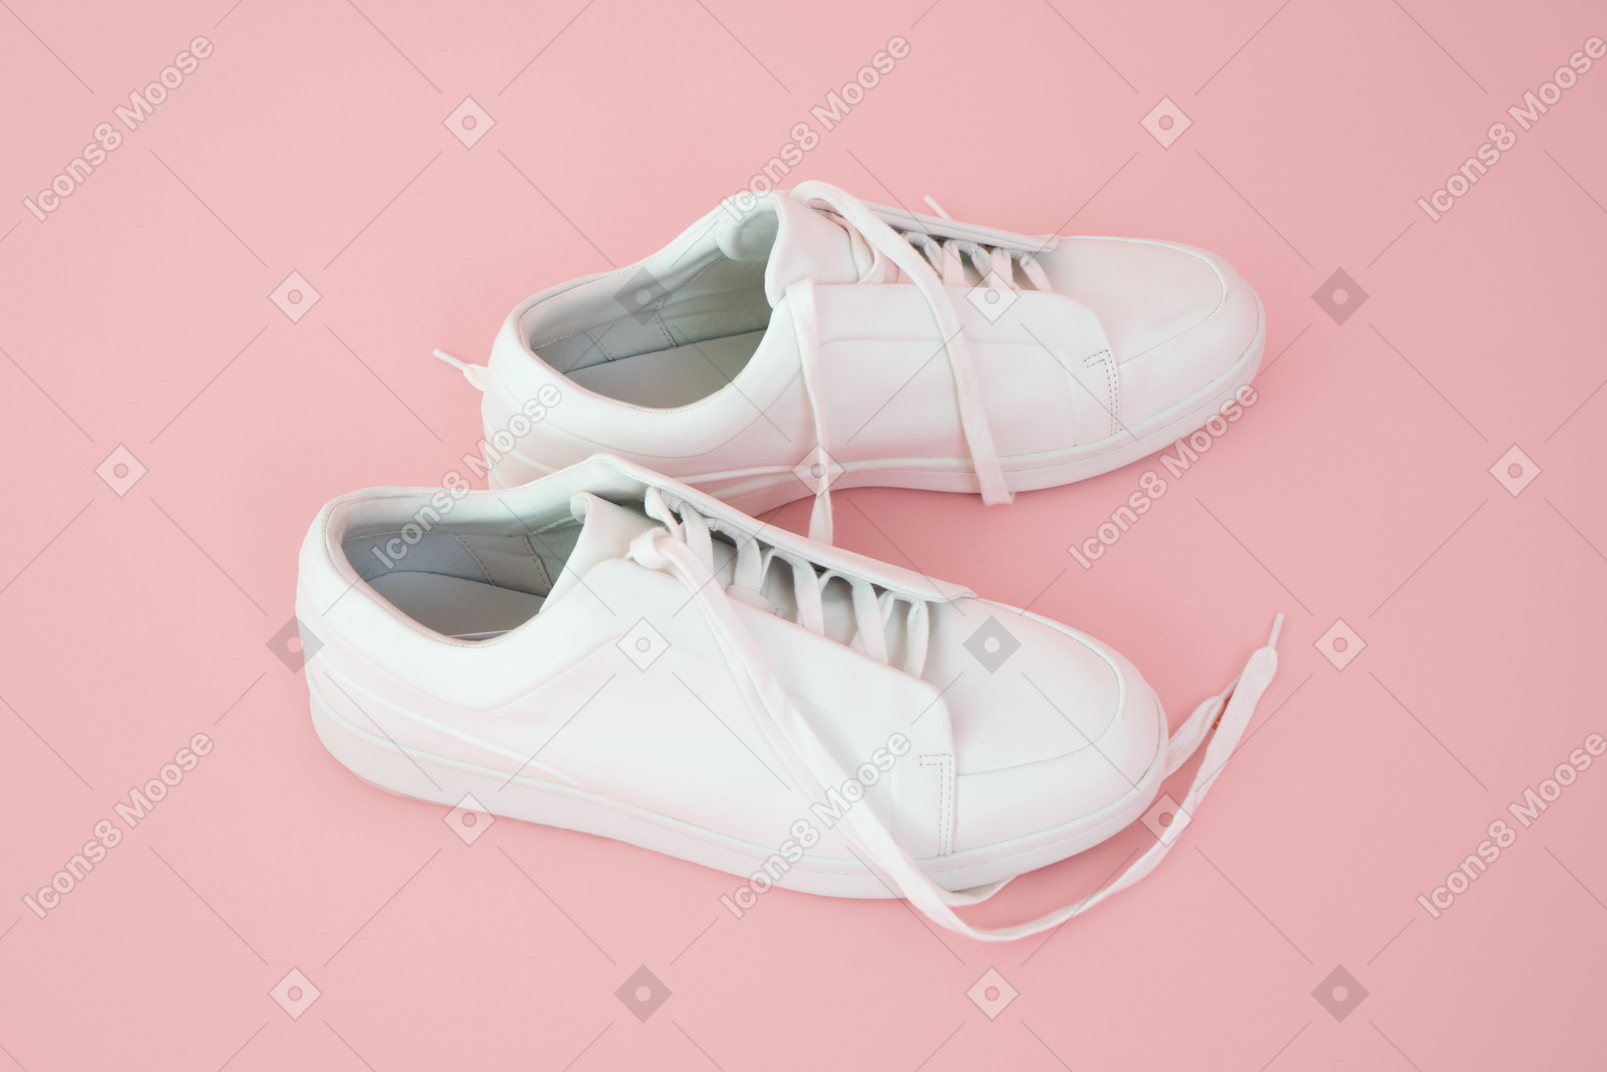 Running shoes over pink background